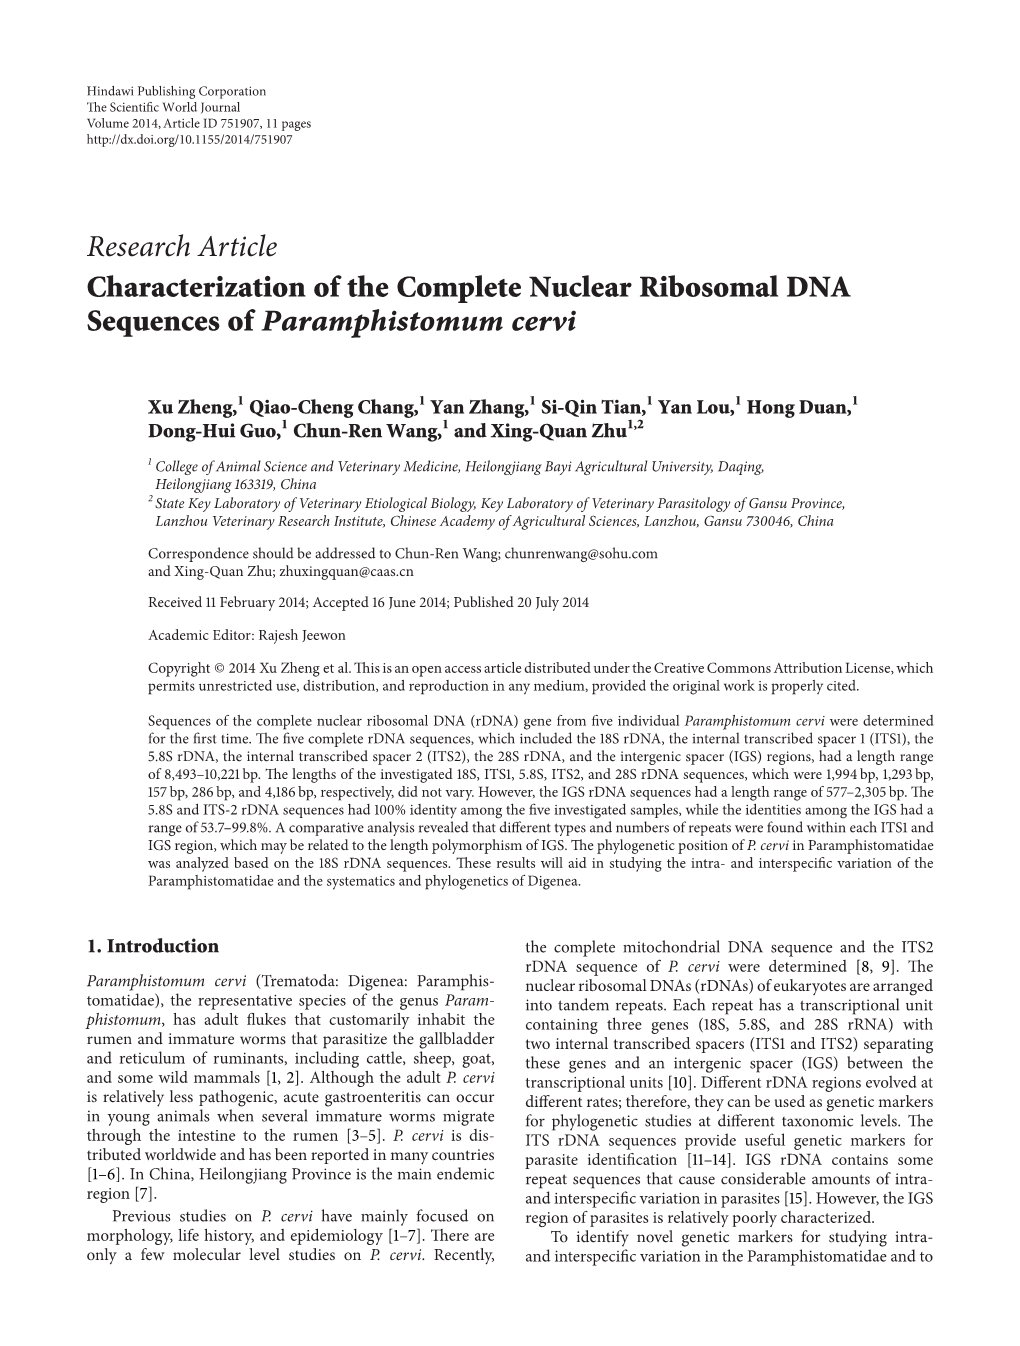 Characterization of the Complete Nuclear Ribosomal DNA Sequences of Paramphistomum Cervi